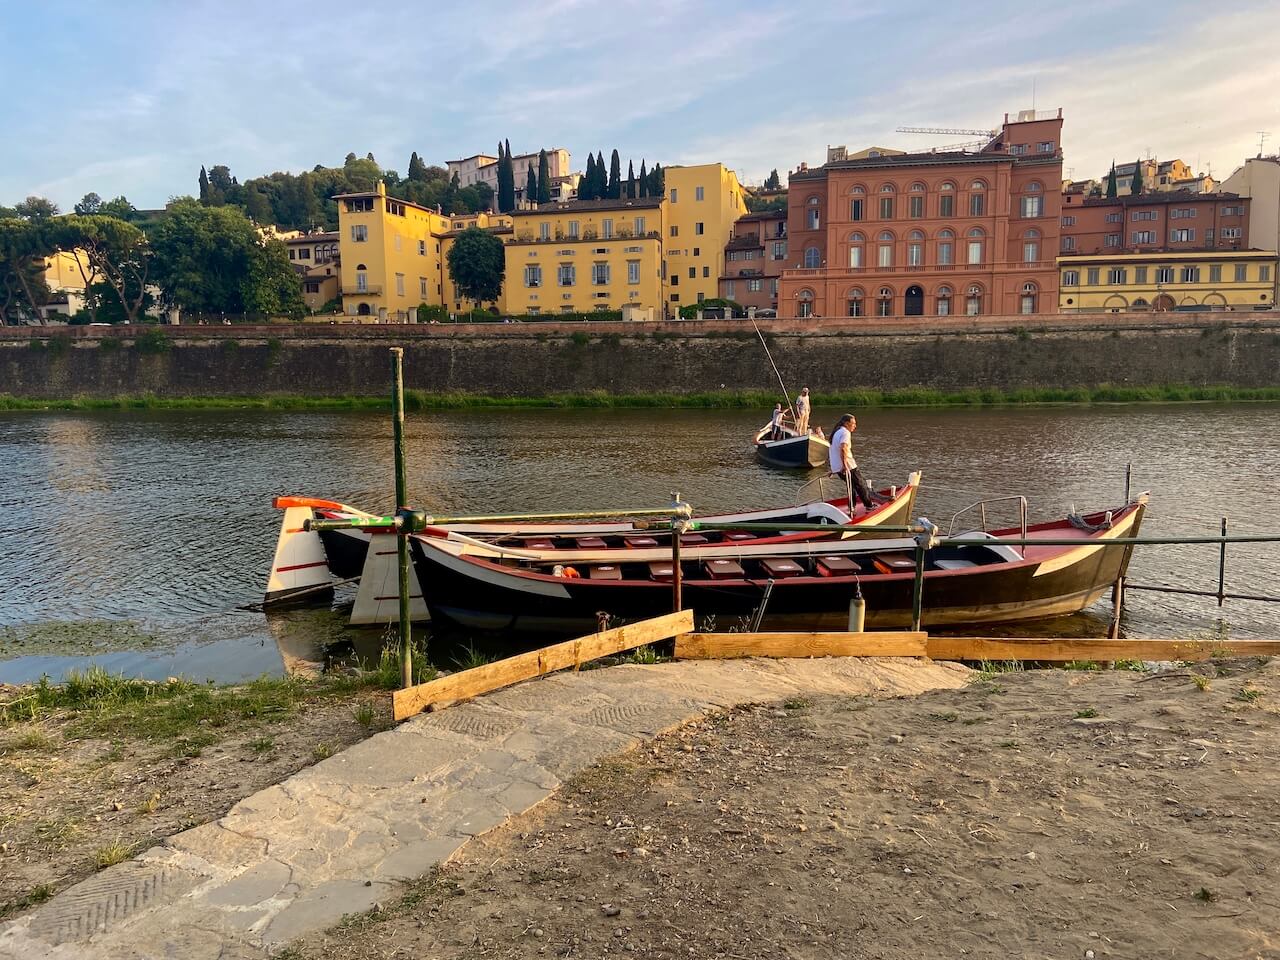 Boats on the Arno River